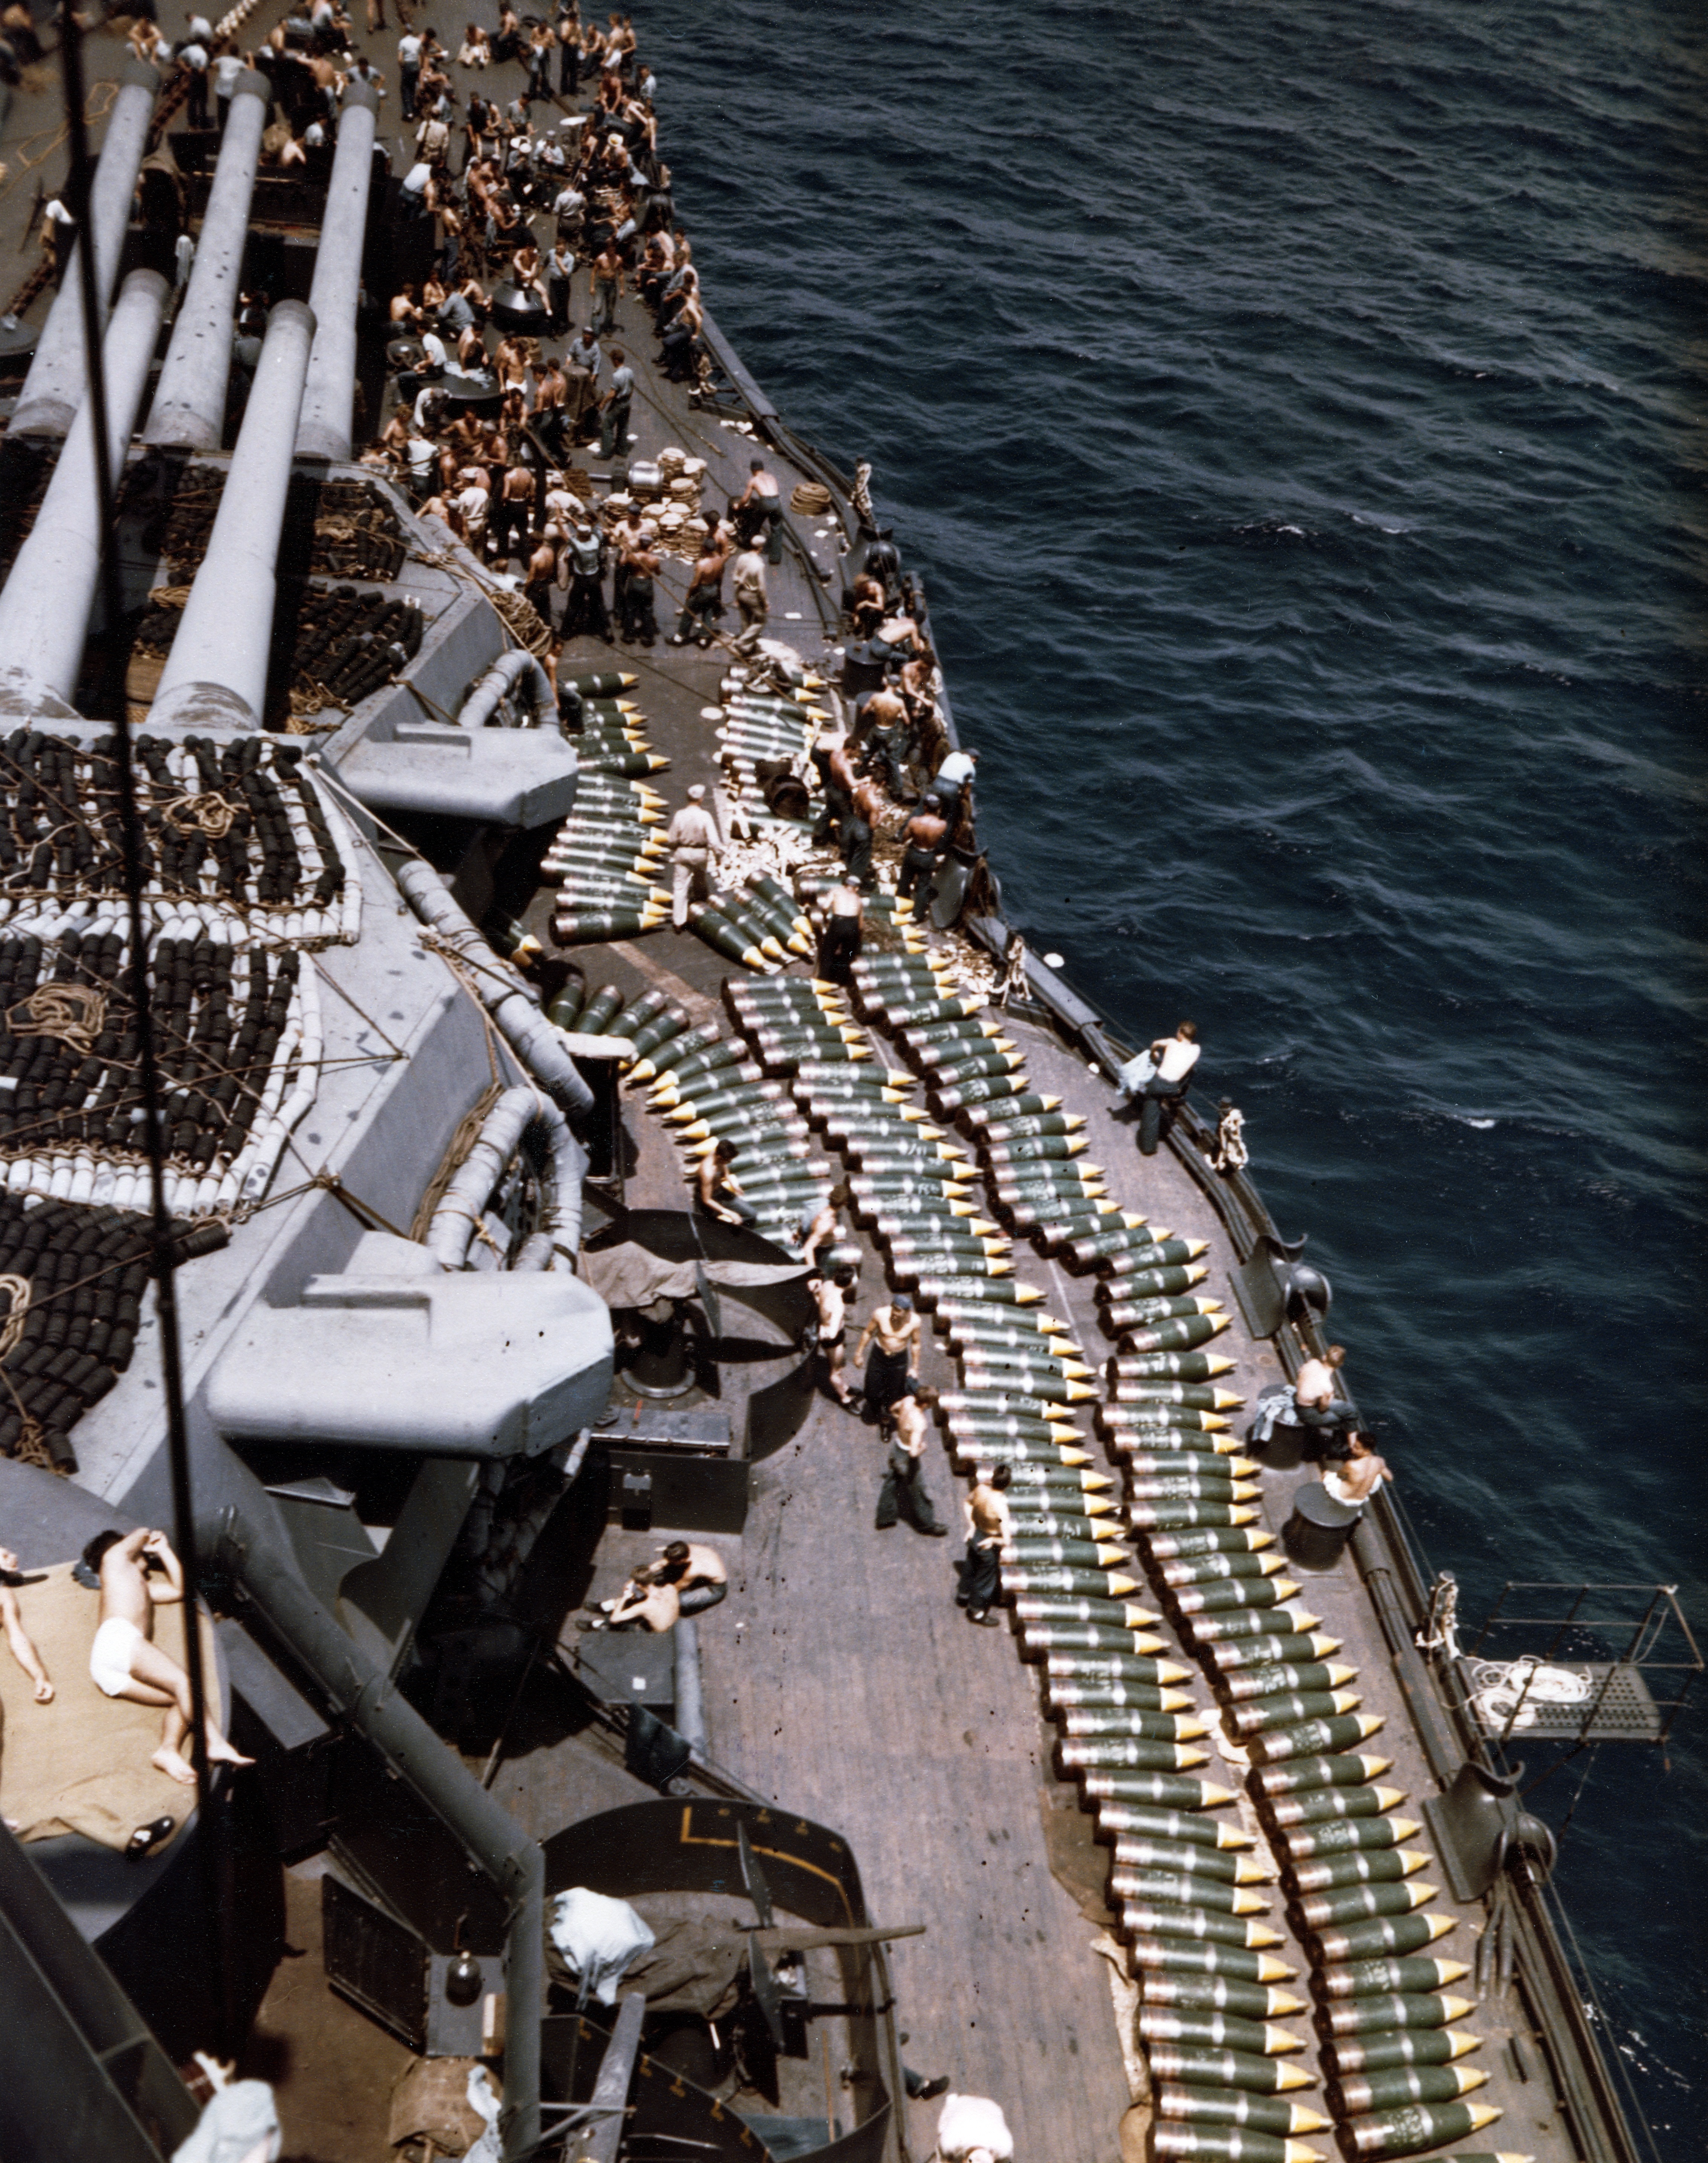 USS New Mexico's 14-inch projectiles on starboard deck forward while being replenished at Eniwetok, Marshall Islands 30 Jun 1944 prior to the invasion of Guam